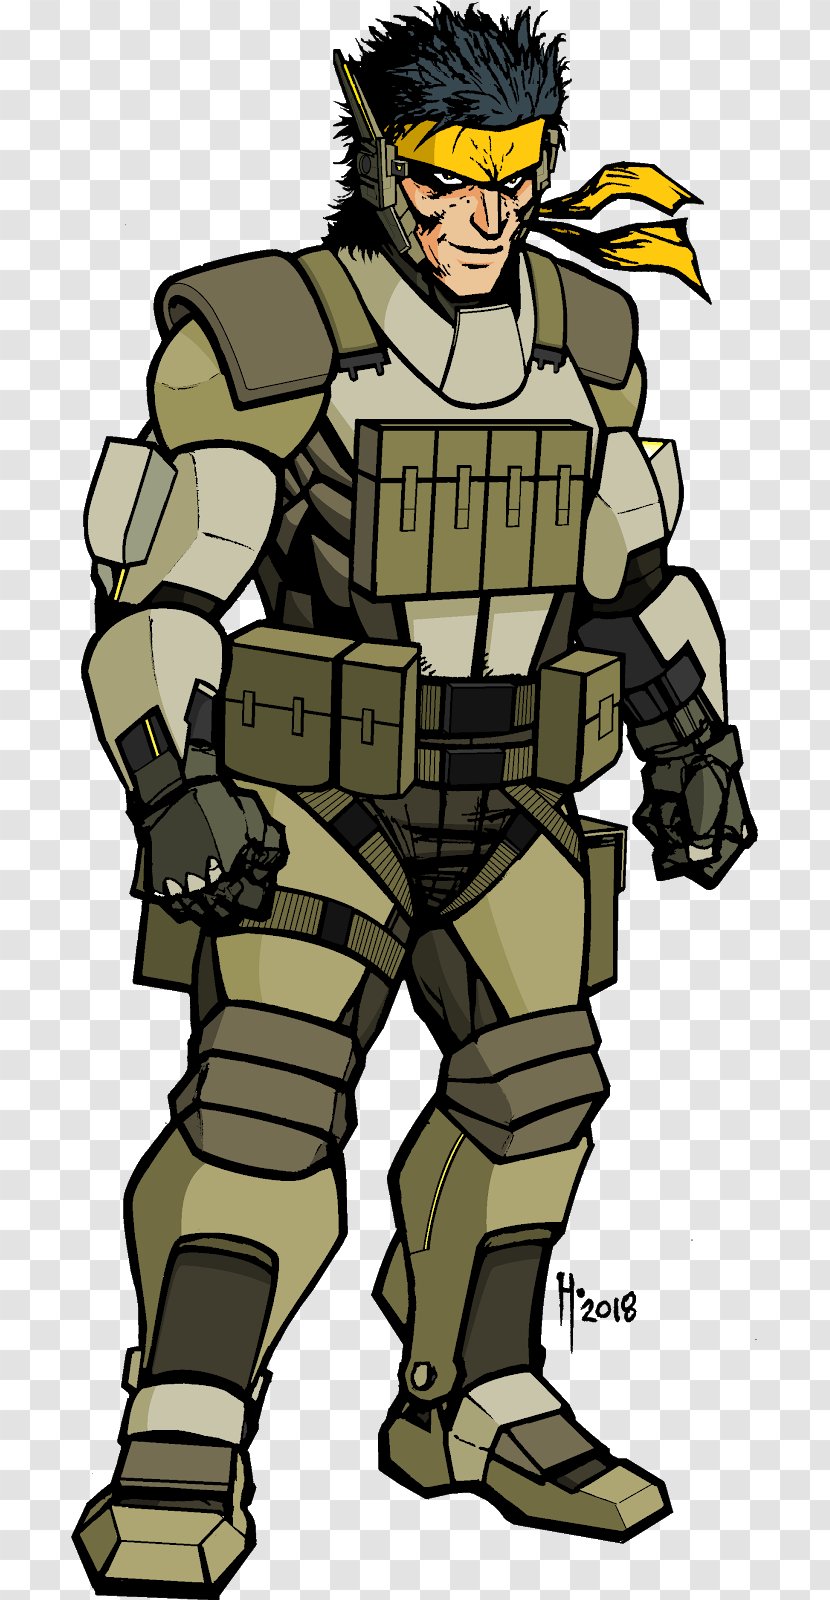 Character Clip Art Illustration Soldier Fiction - Blog - Solid Snake Mgs Transparent PNG